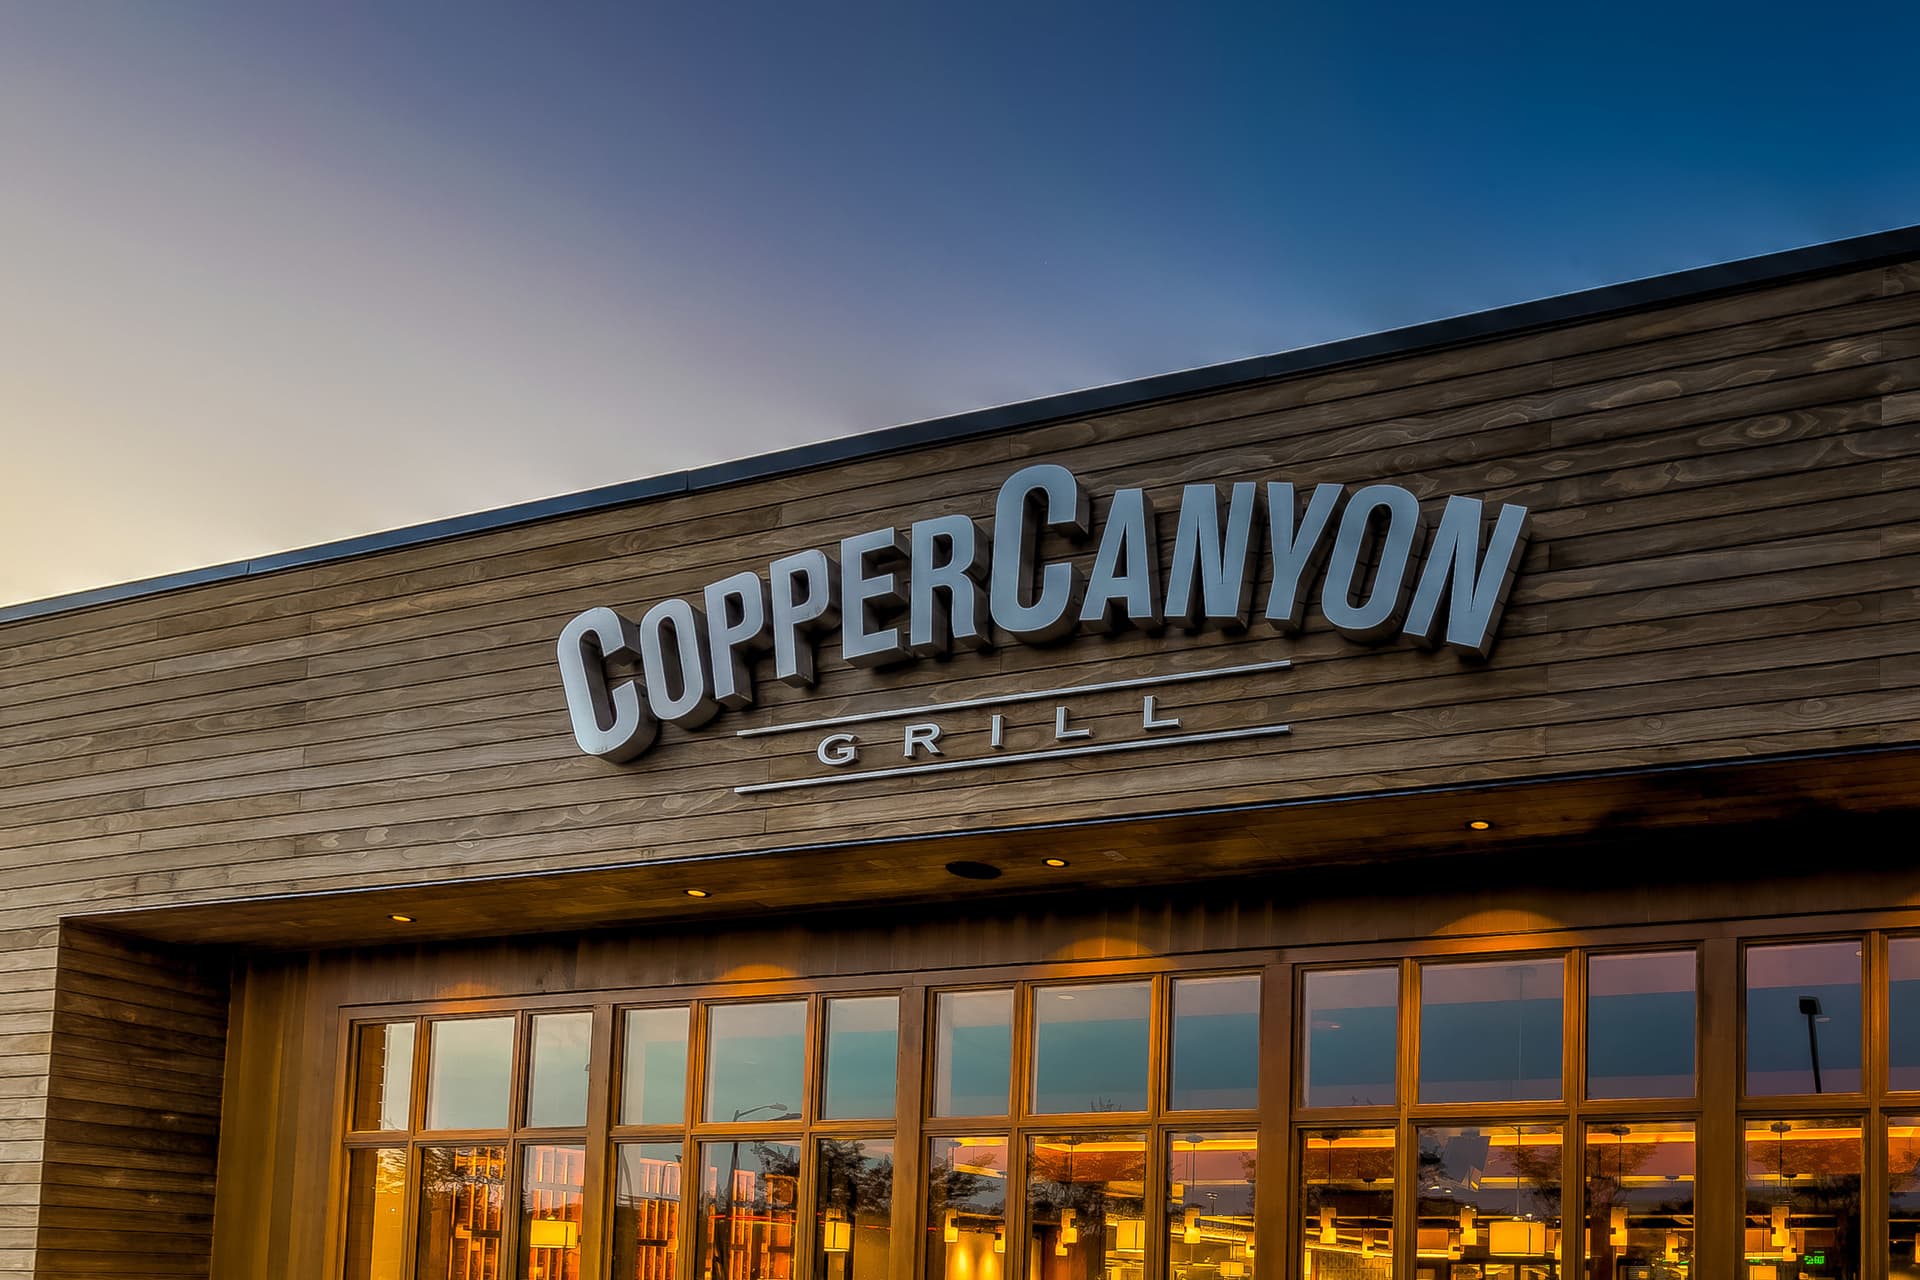 COPPER CANYON GRILL – ARUNDEL MILLS